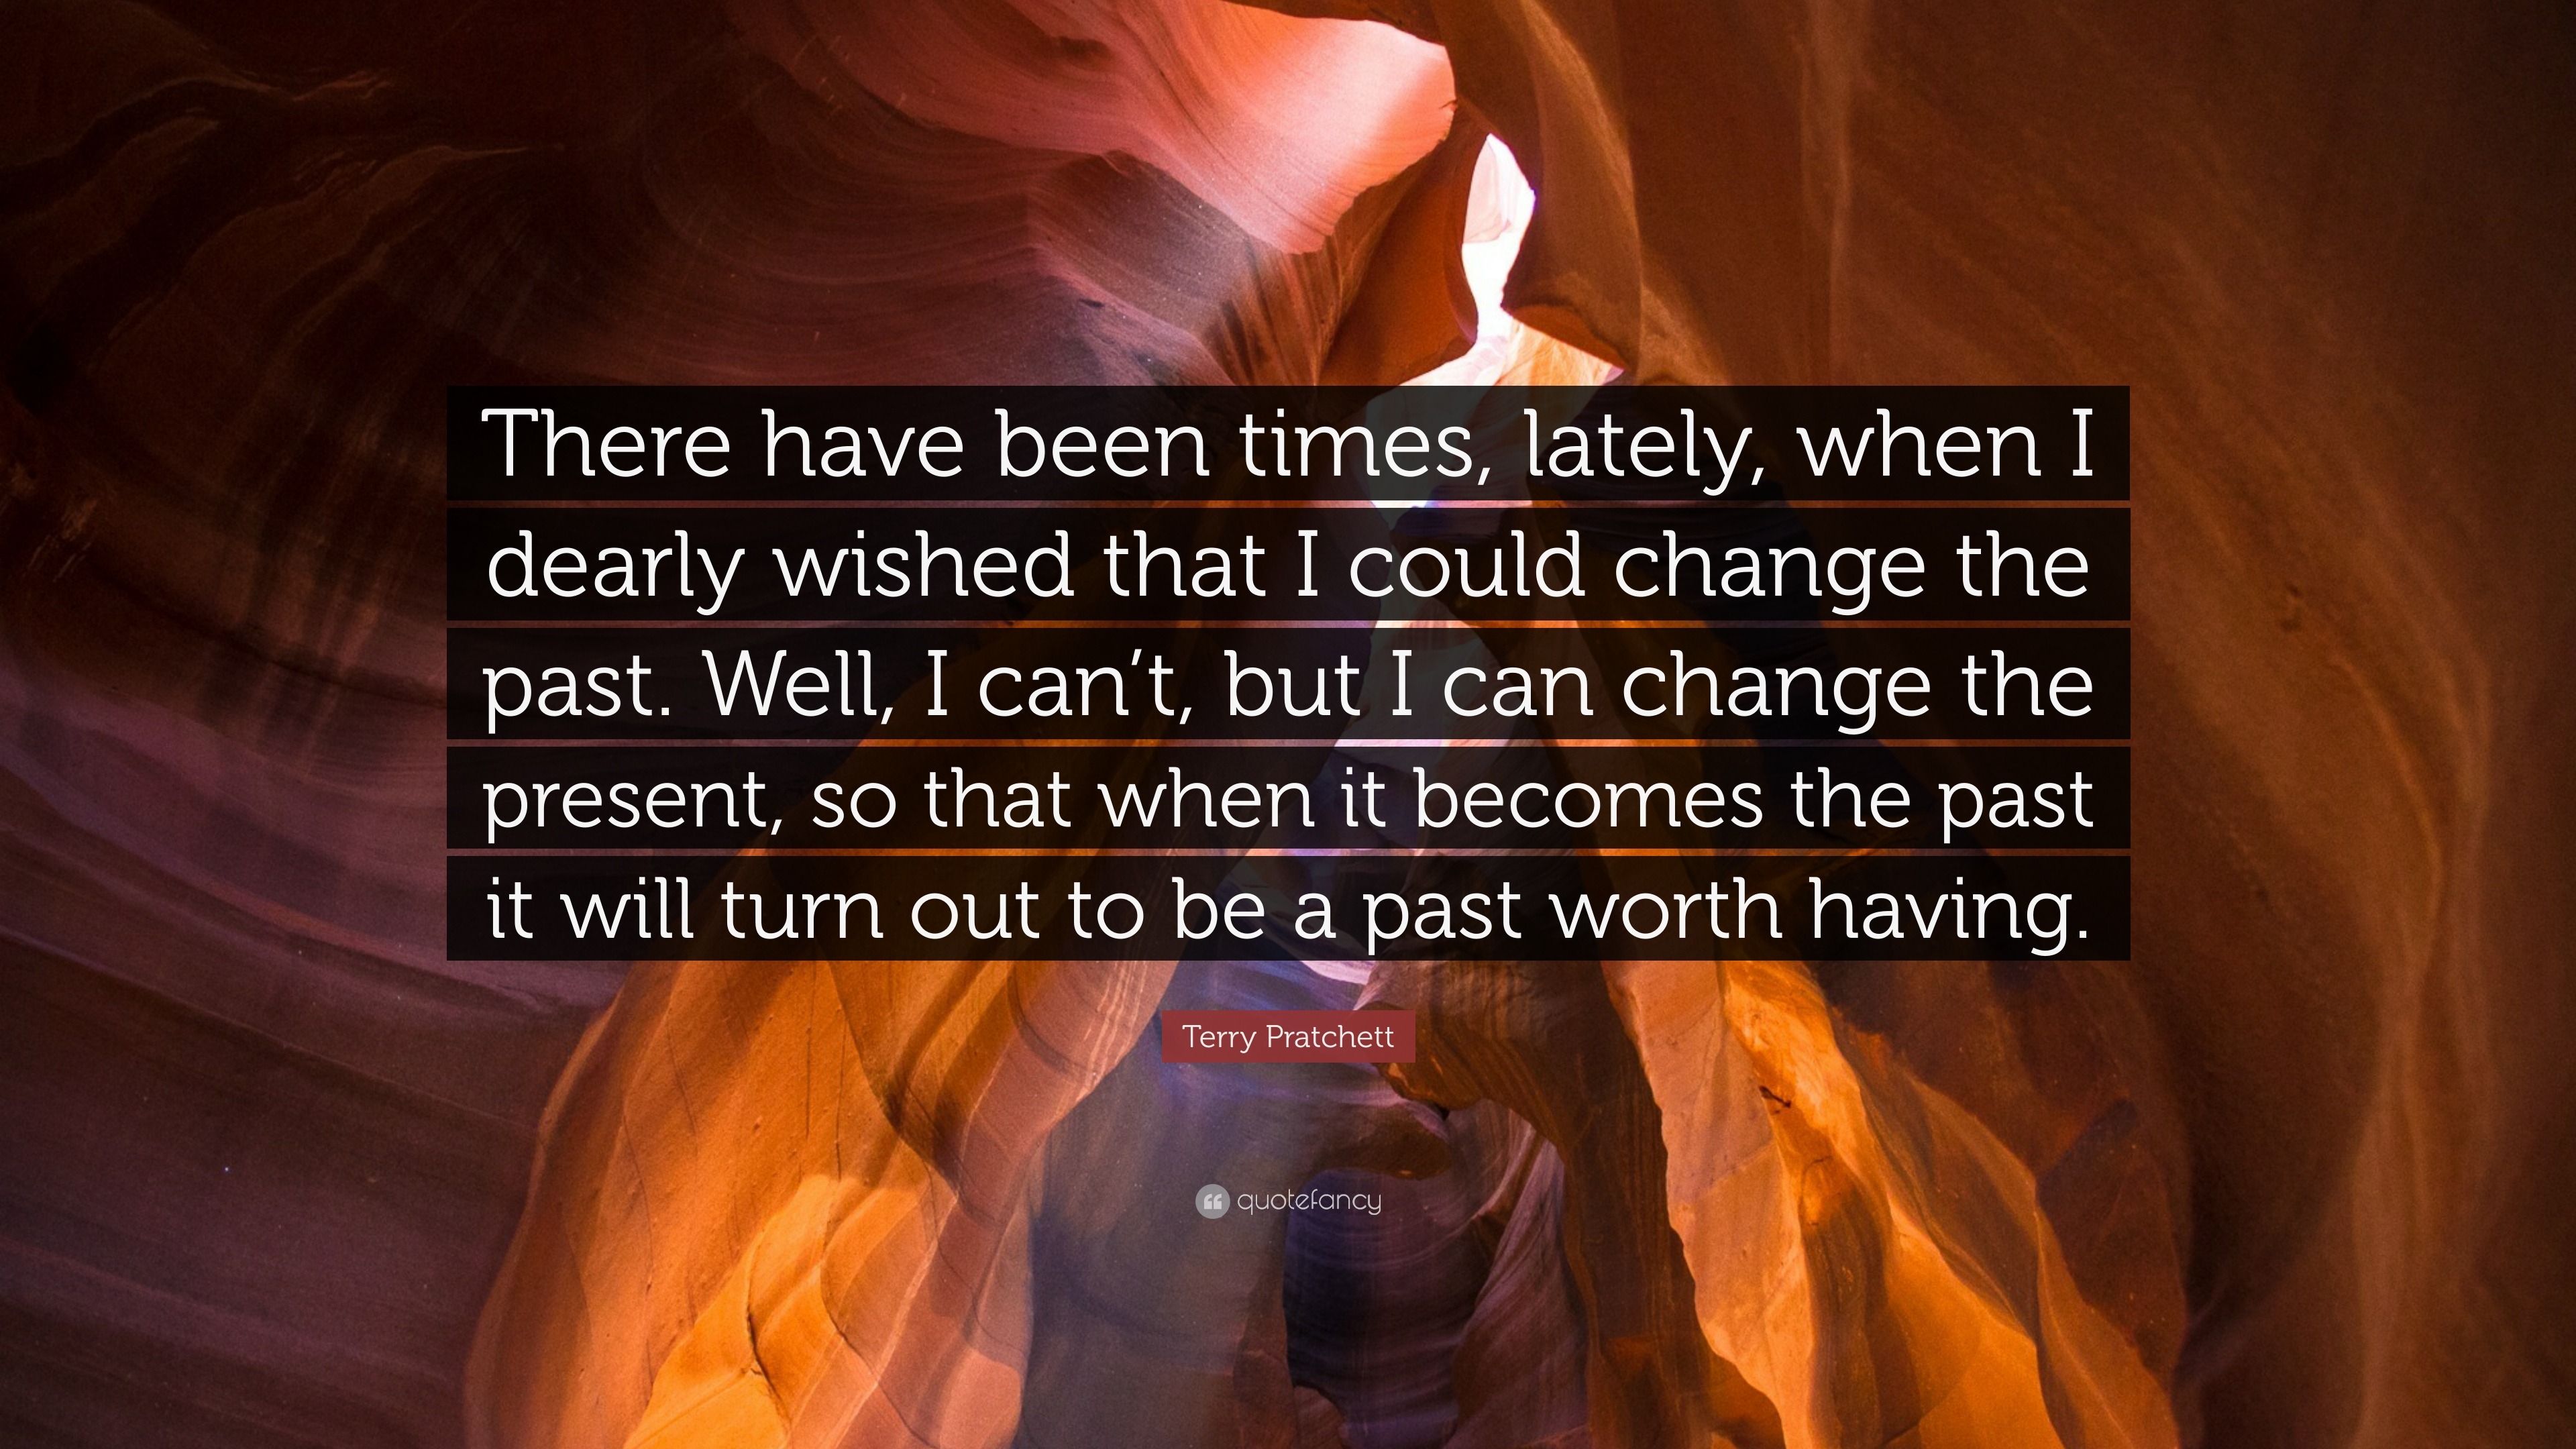 Terry Pratchett Quote: “There have been times, lately, when I dearly ...